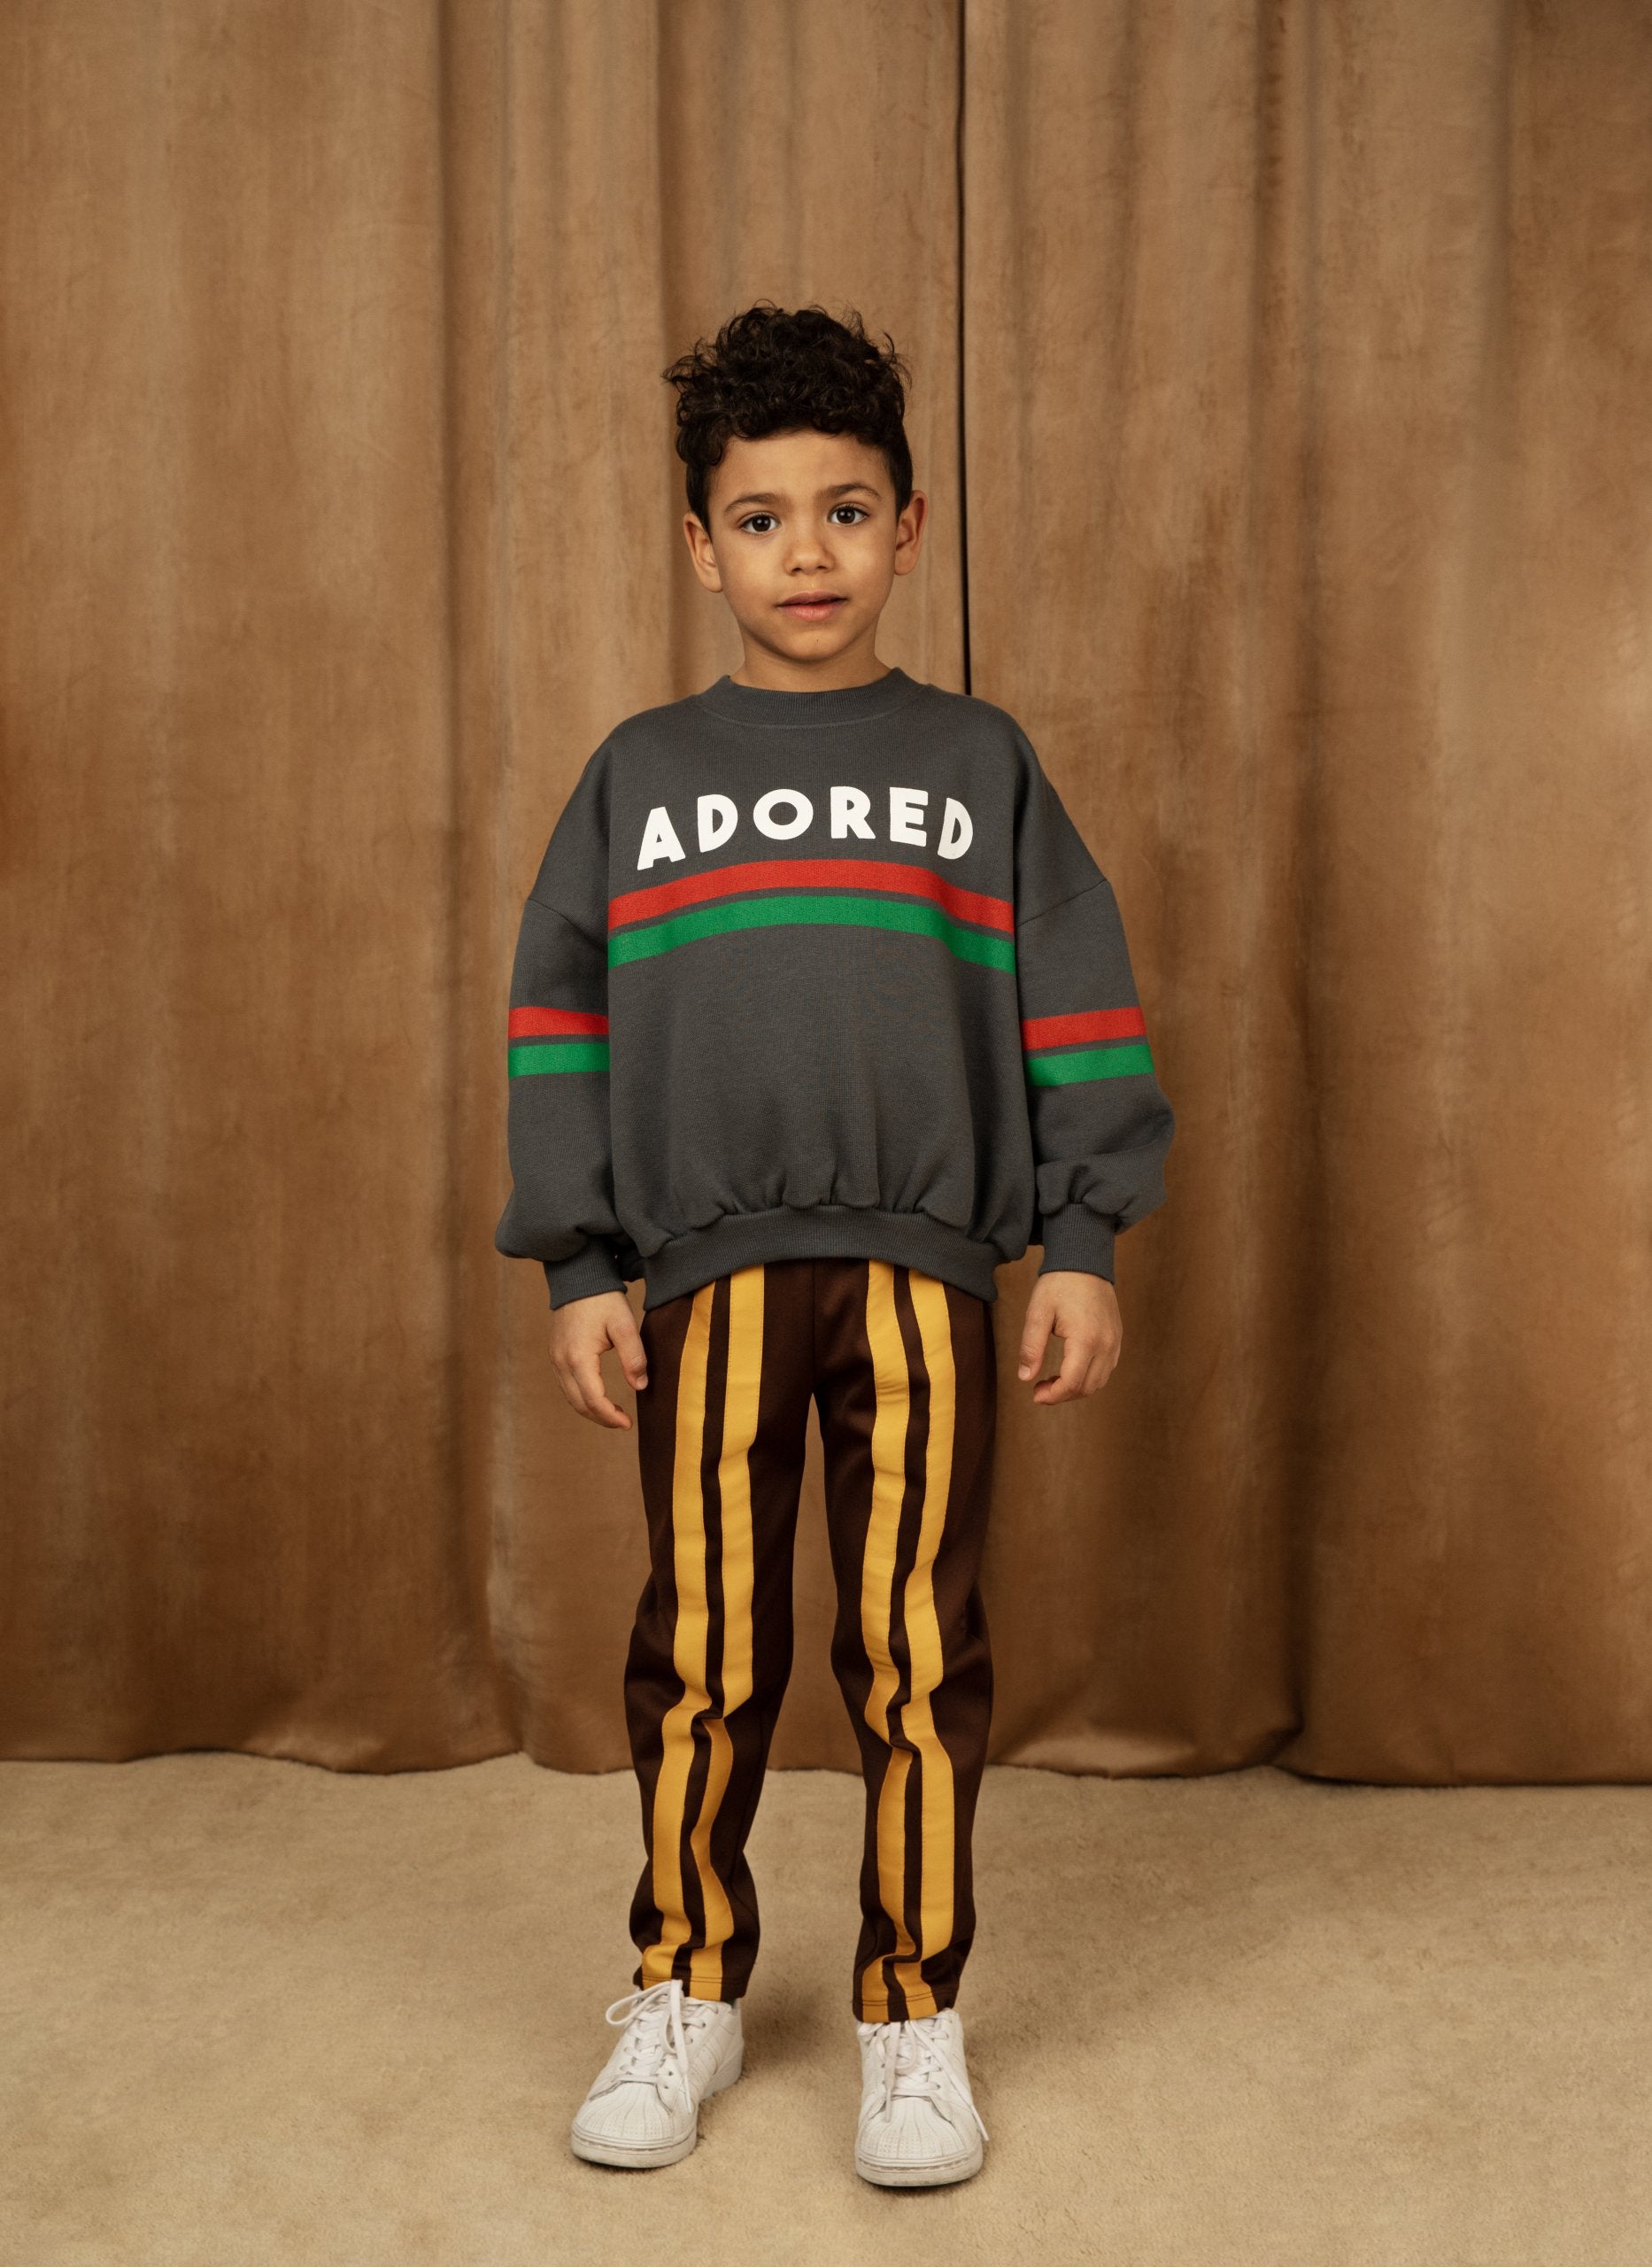 ADORED SP SWEATSHIRT - Mini Rodini sweater in black with ADORED written across the front with red and green stripes